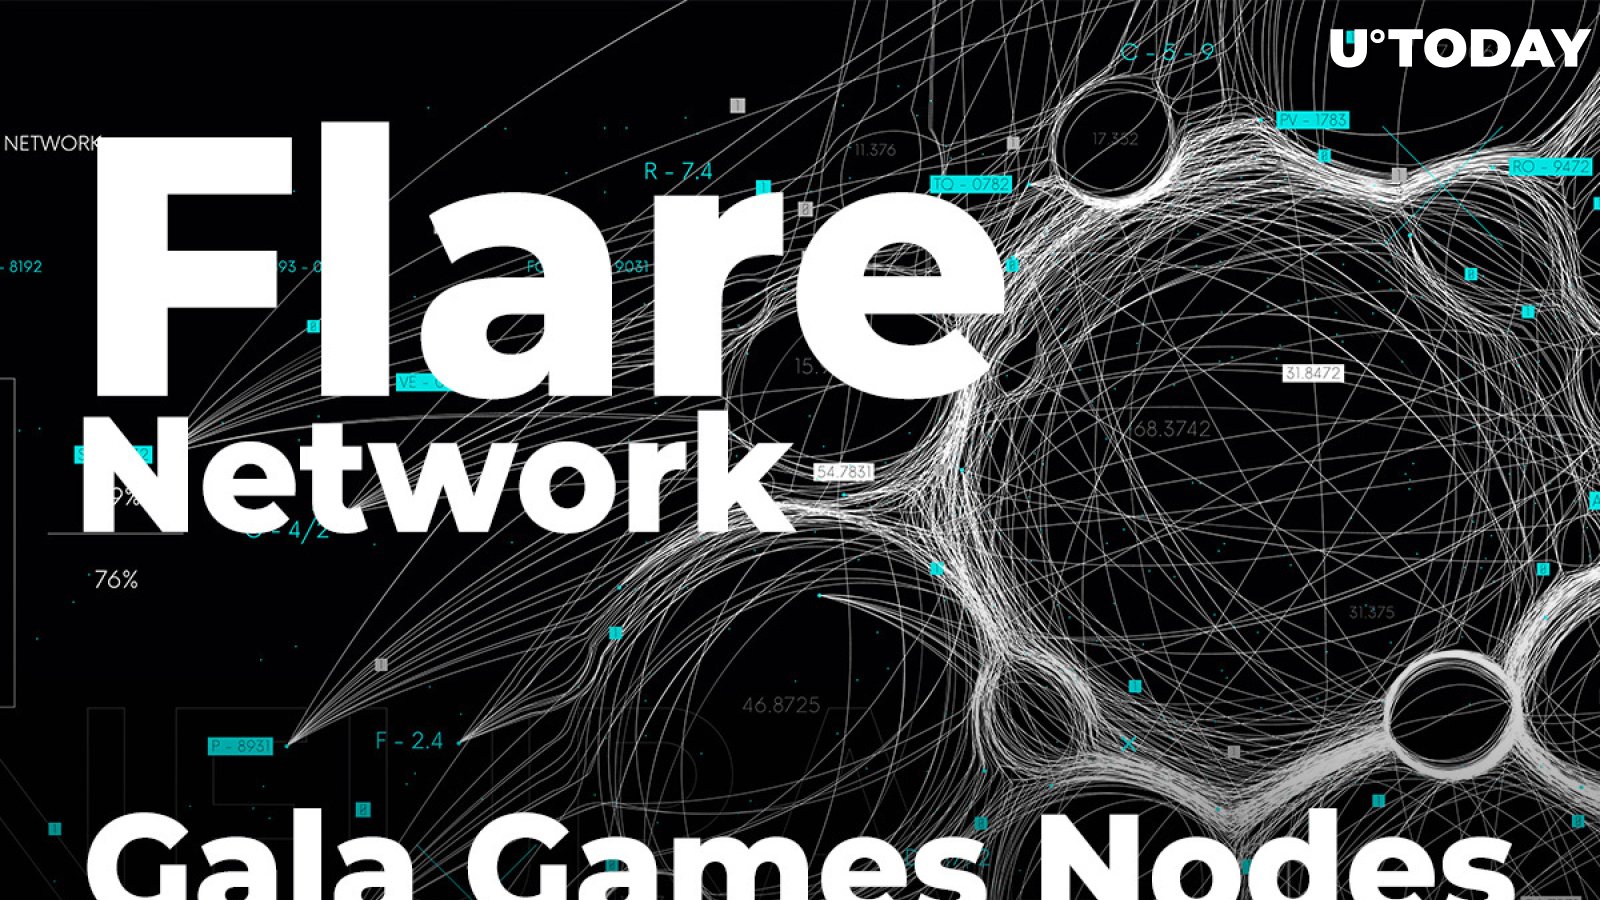 Flare Network to Be Supported by Gala Games Nodes: Details